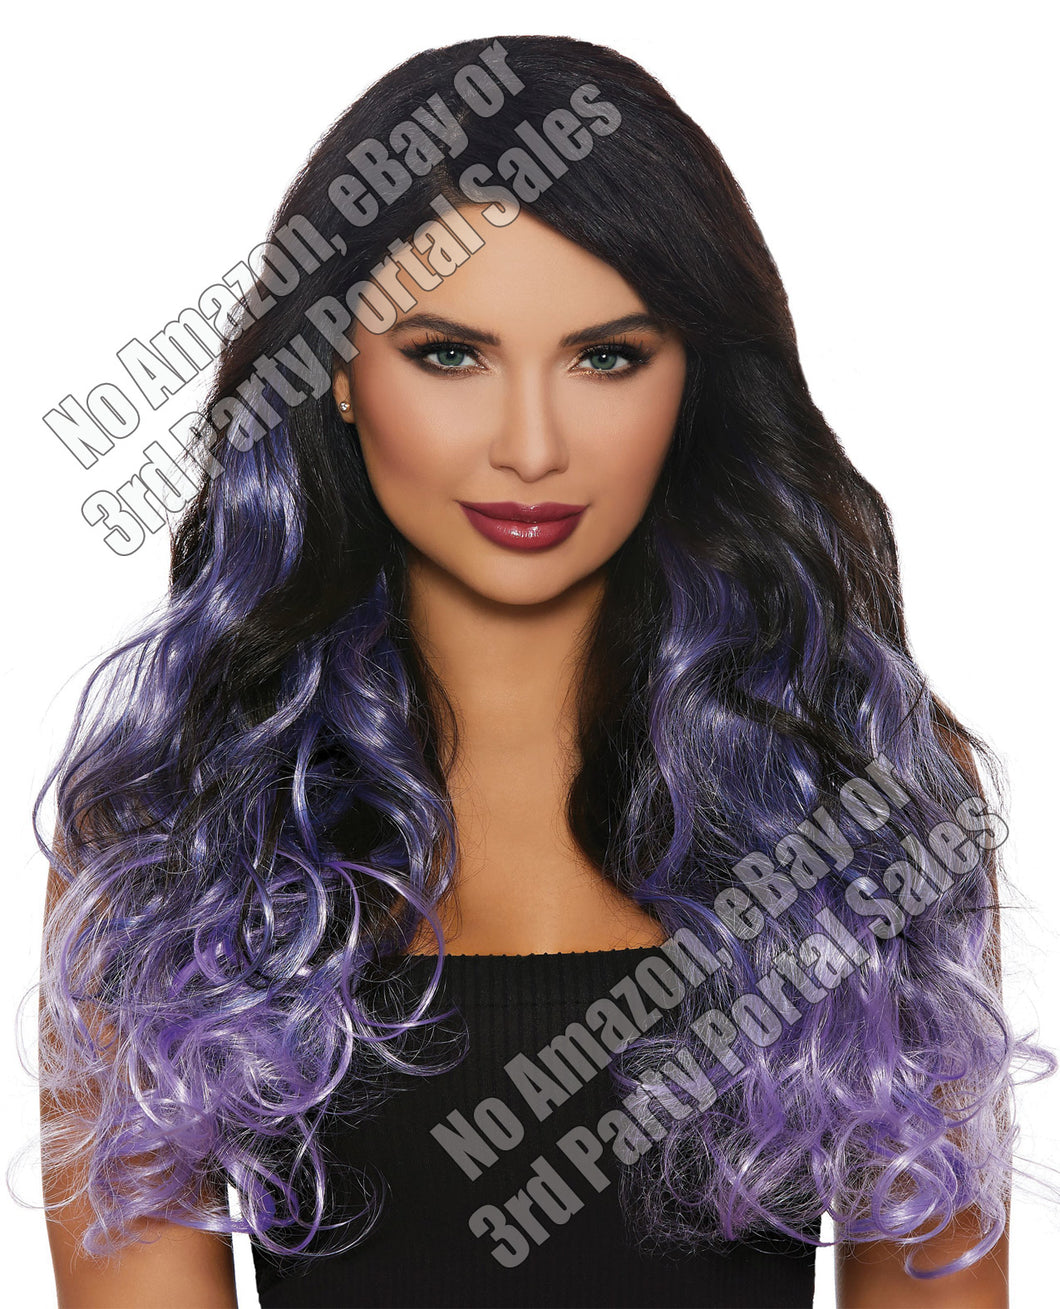 Long Curly Ombre 3 Pc Hair Extensions - Gun Metal-lavender-lilac